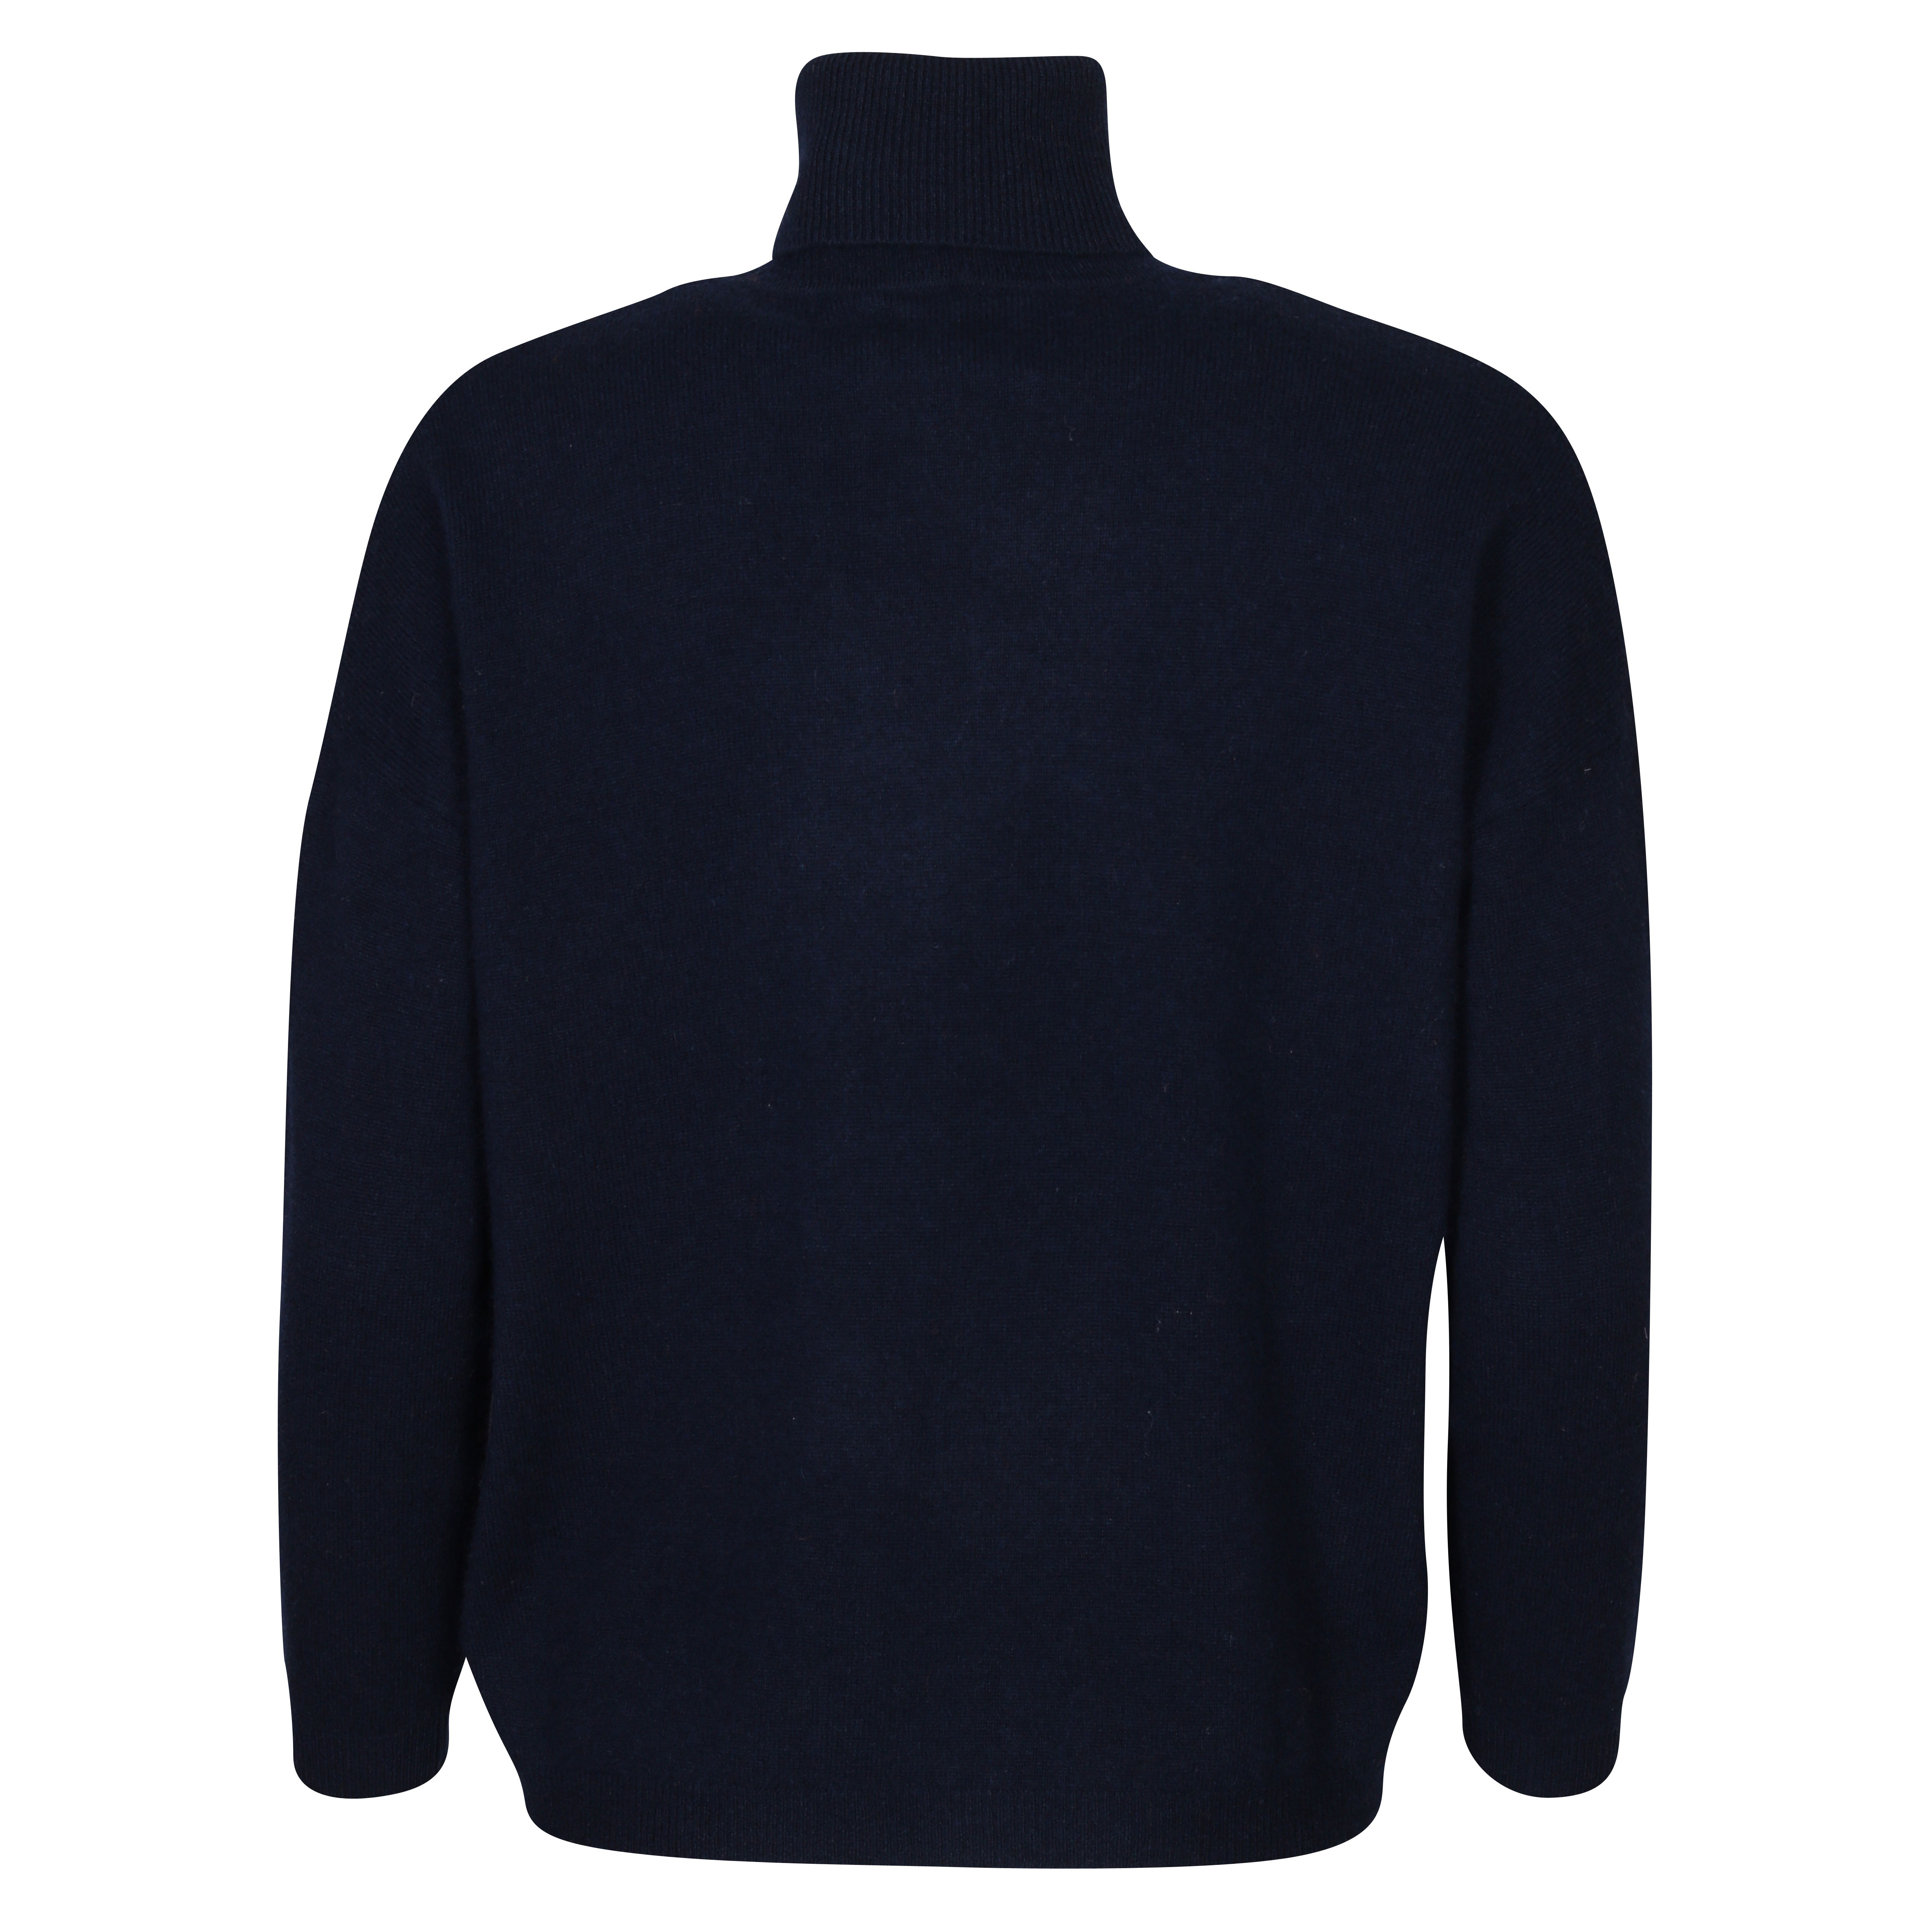 Absolut Cashmere Ambre Turtle Neck in Nuit XS